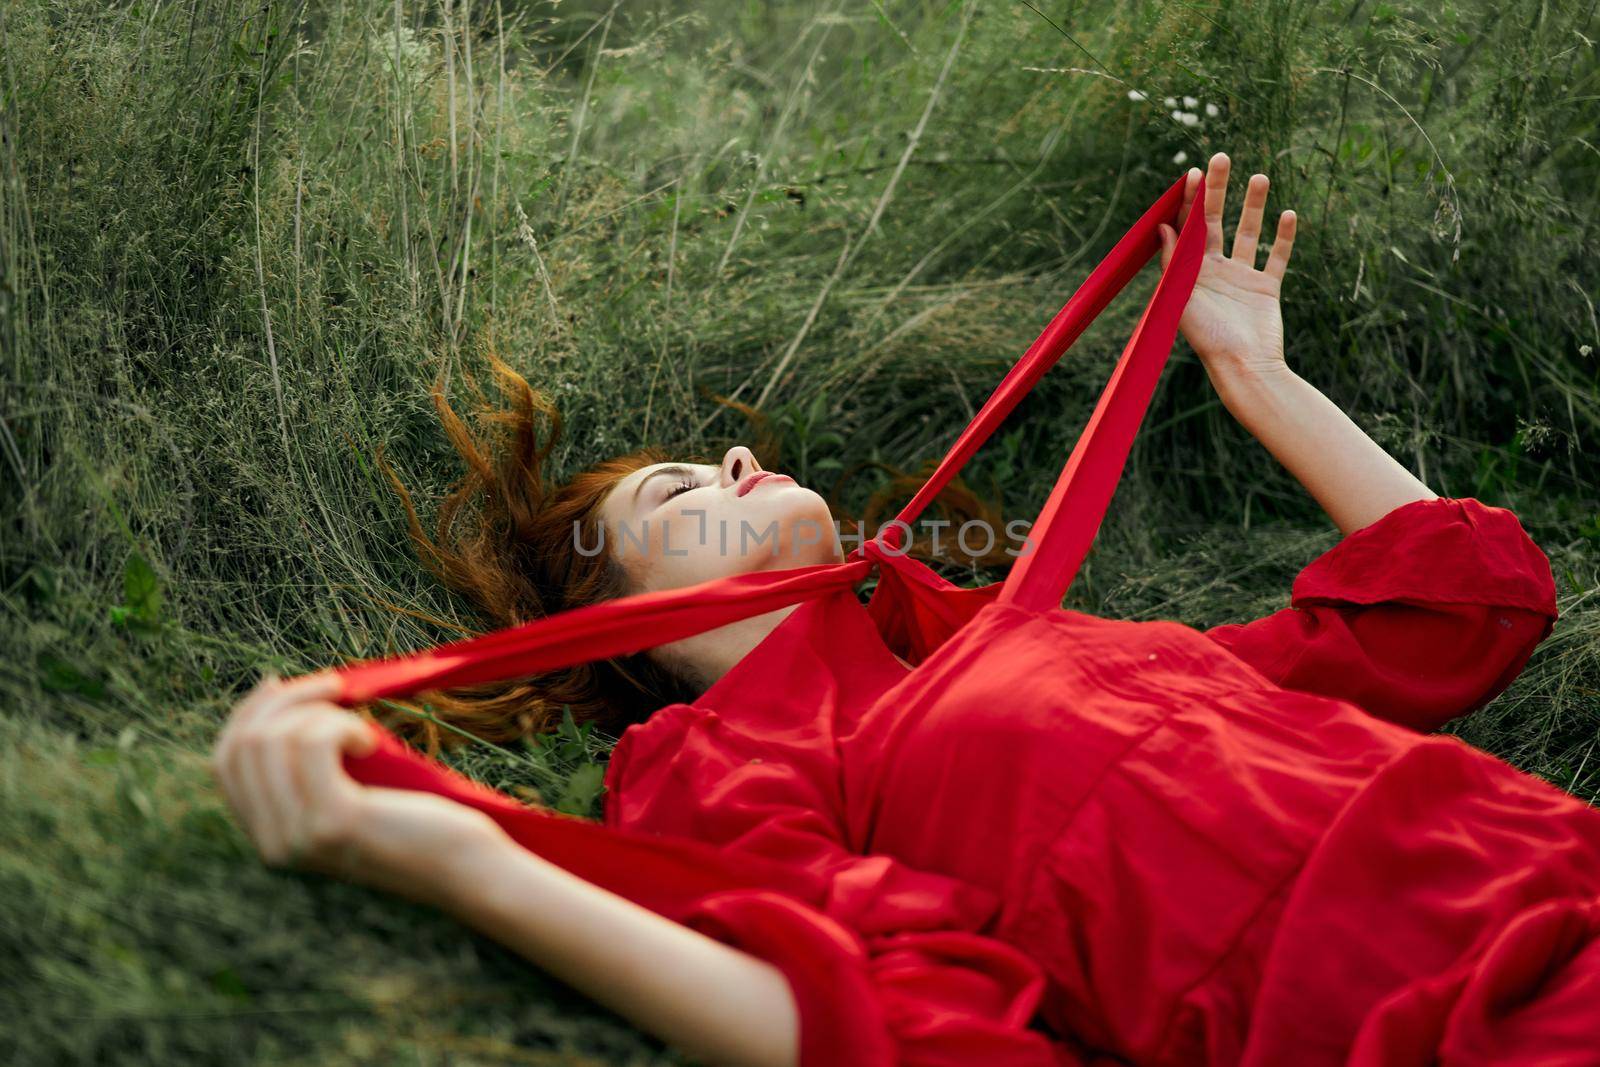 woman in red dress lying on the grass fresh air nature romance by Vichizh